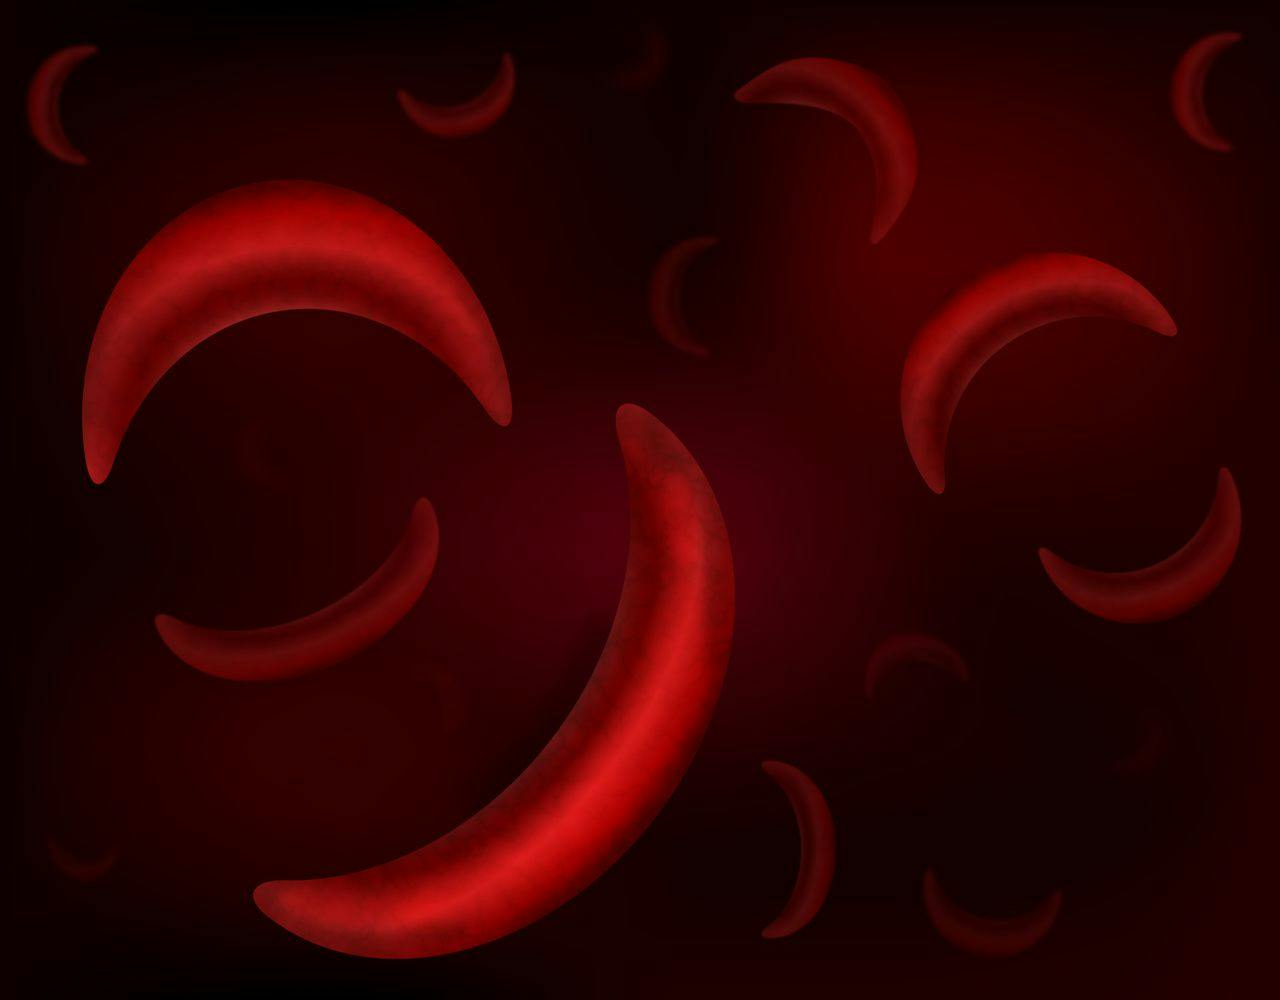 Patients with Sickle Cell Disease Benefit Most from Interventions That Reduce Hemolytic Anemia